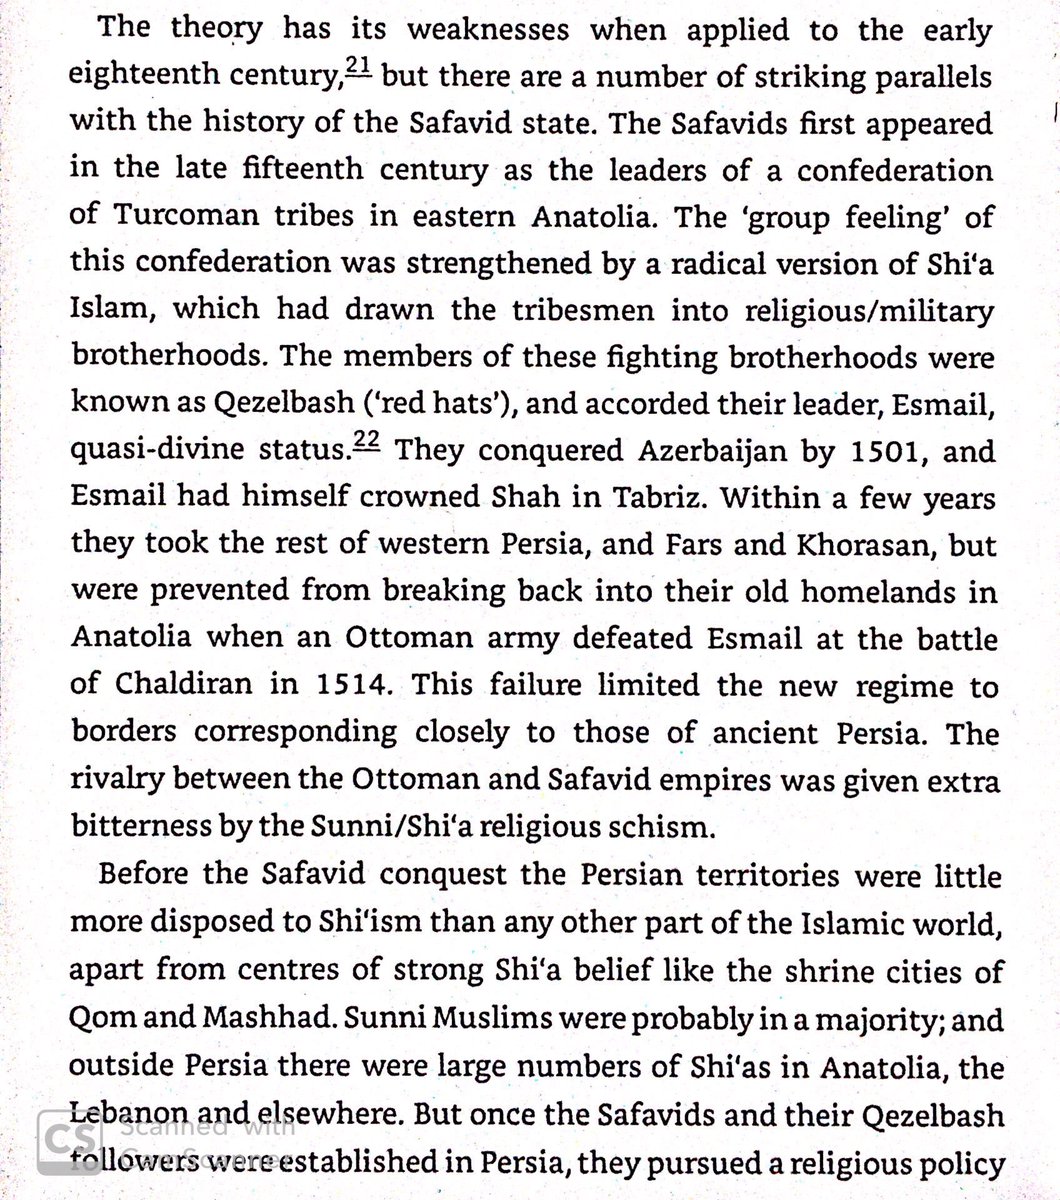 Discussion of Ib Khaldun’s asabiya/decadence theory & how it applies to Nader’s predecessors, the Safavids. Safavids started as fanatical Shia warbands in late 1400s & were corrupted by harem life & dynastic intrigues by the early 1700s.